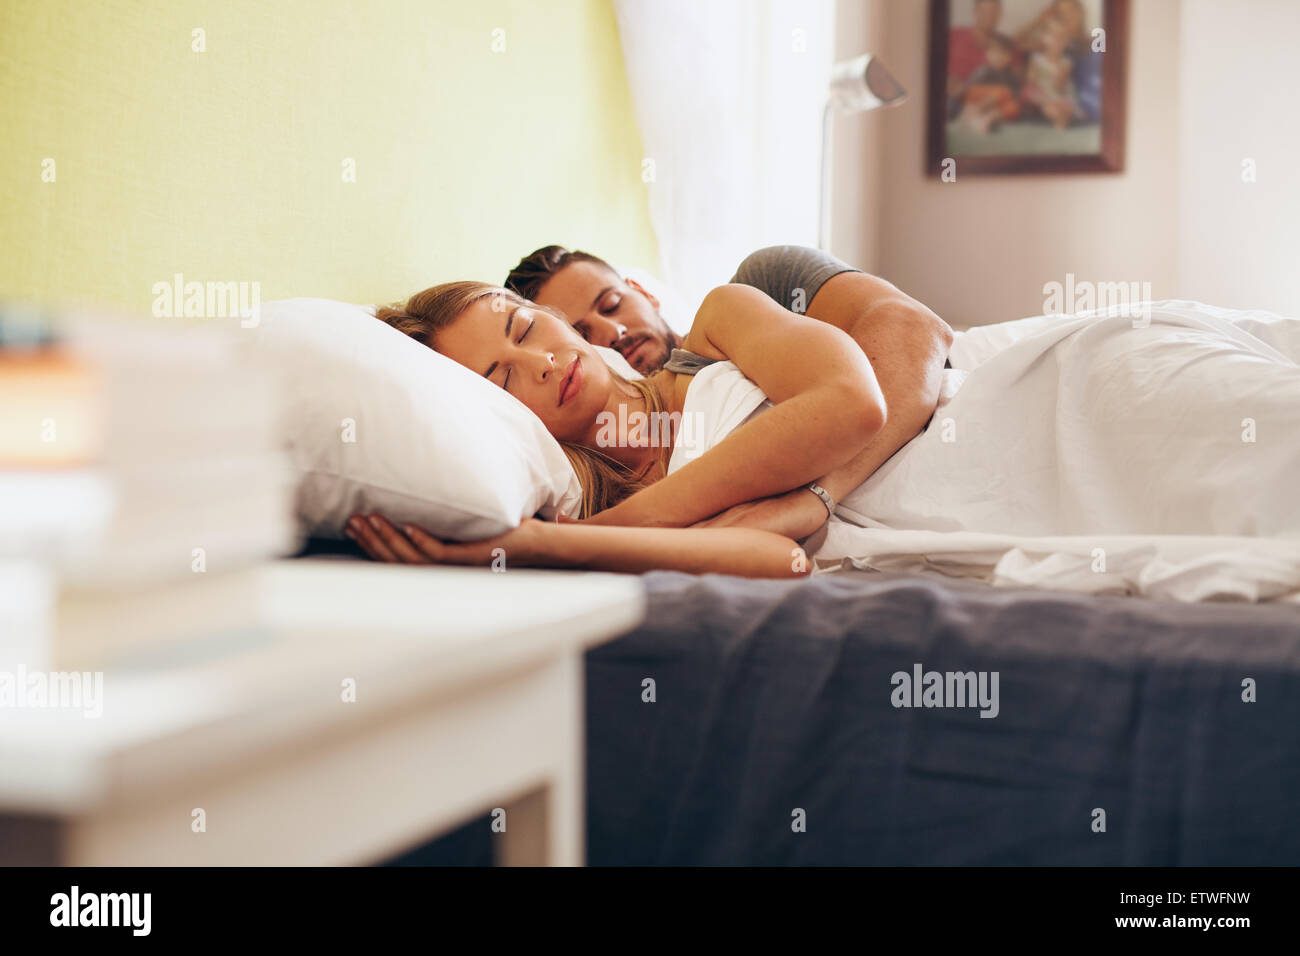 Young adult couple sleeping peacefully on the bed in bedroom. Young man embracing woman while lying asleep in bed. Stock Photo